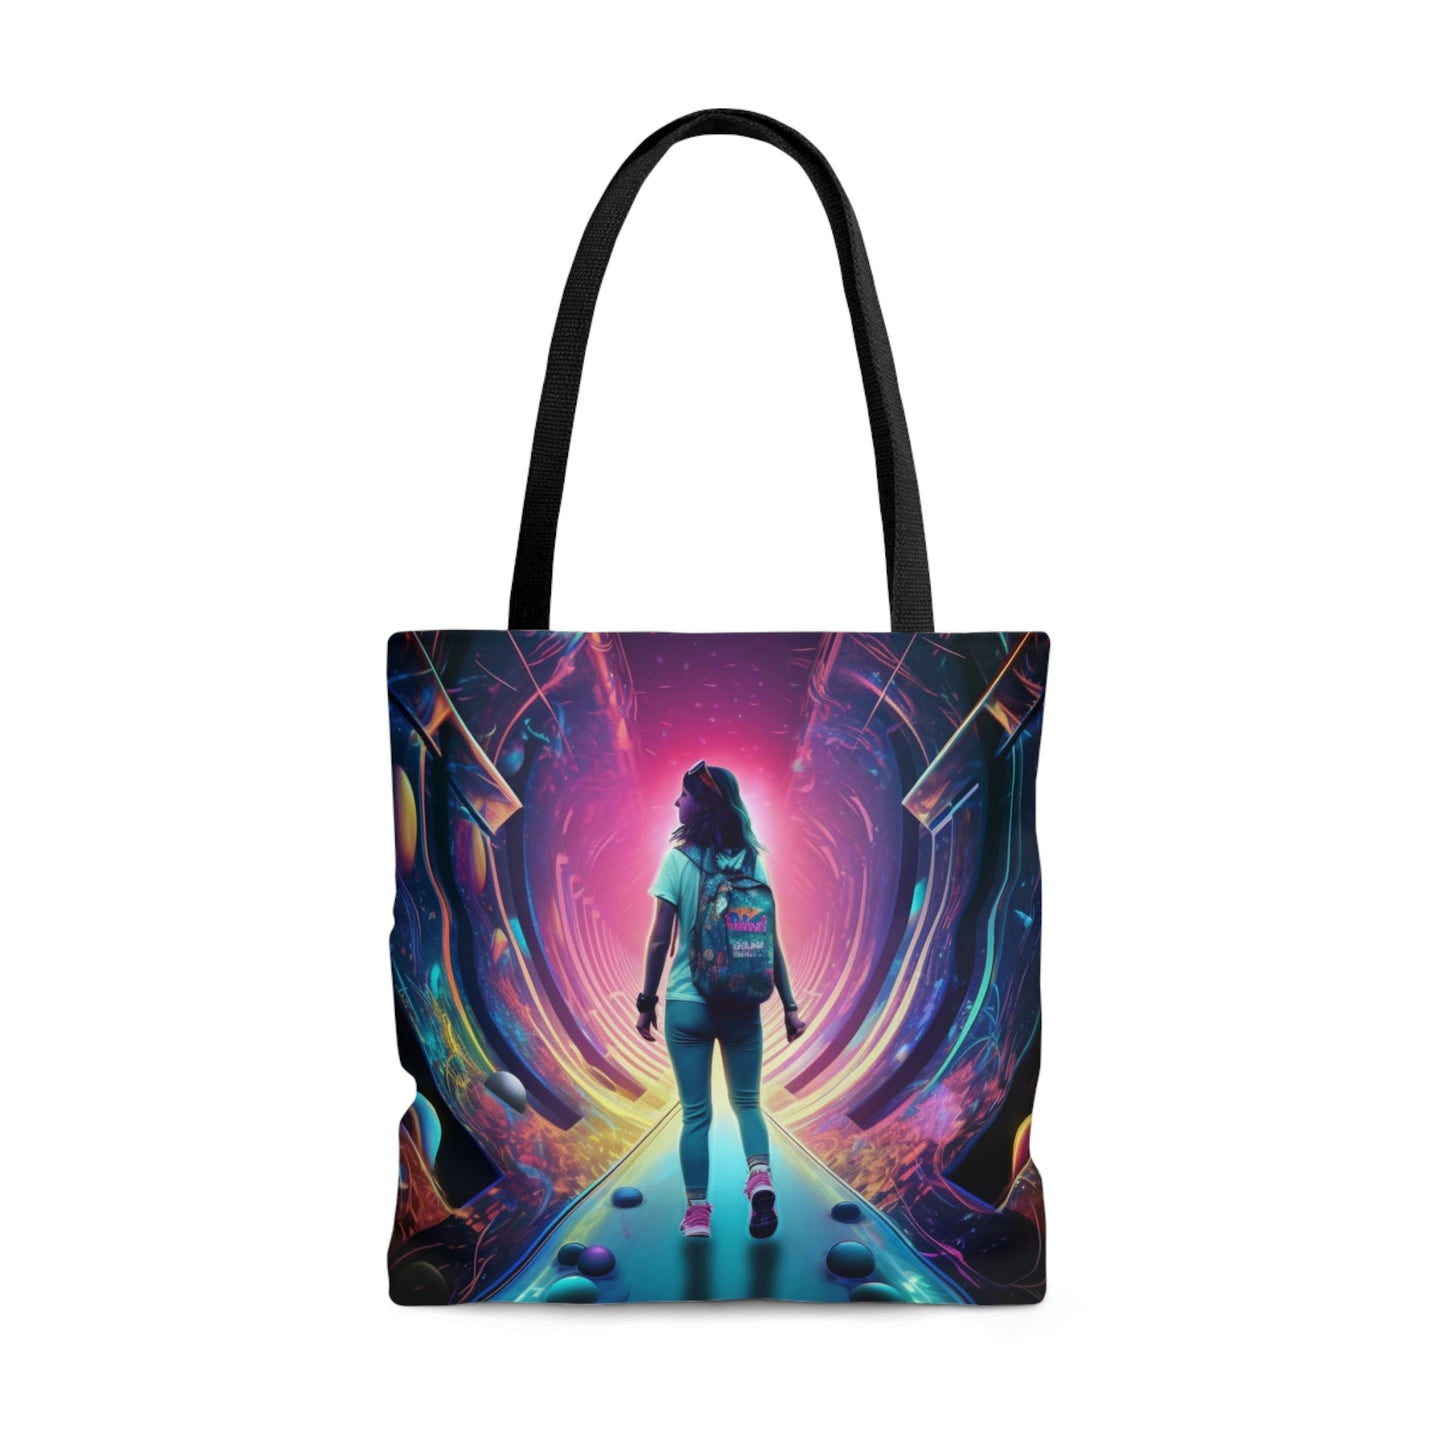 Star Path Tote Bag.  Take your imagination and go wherever it leads you.